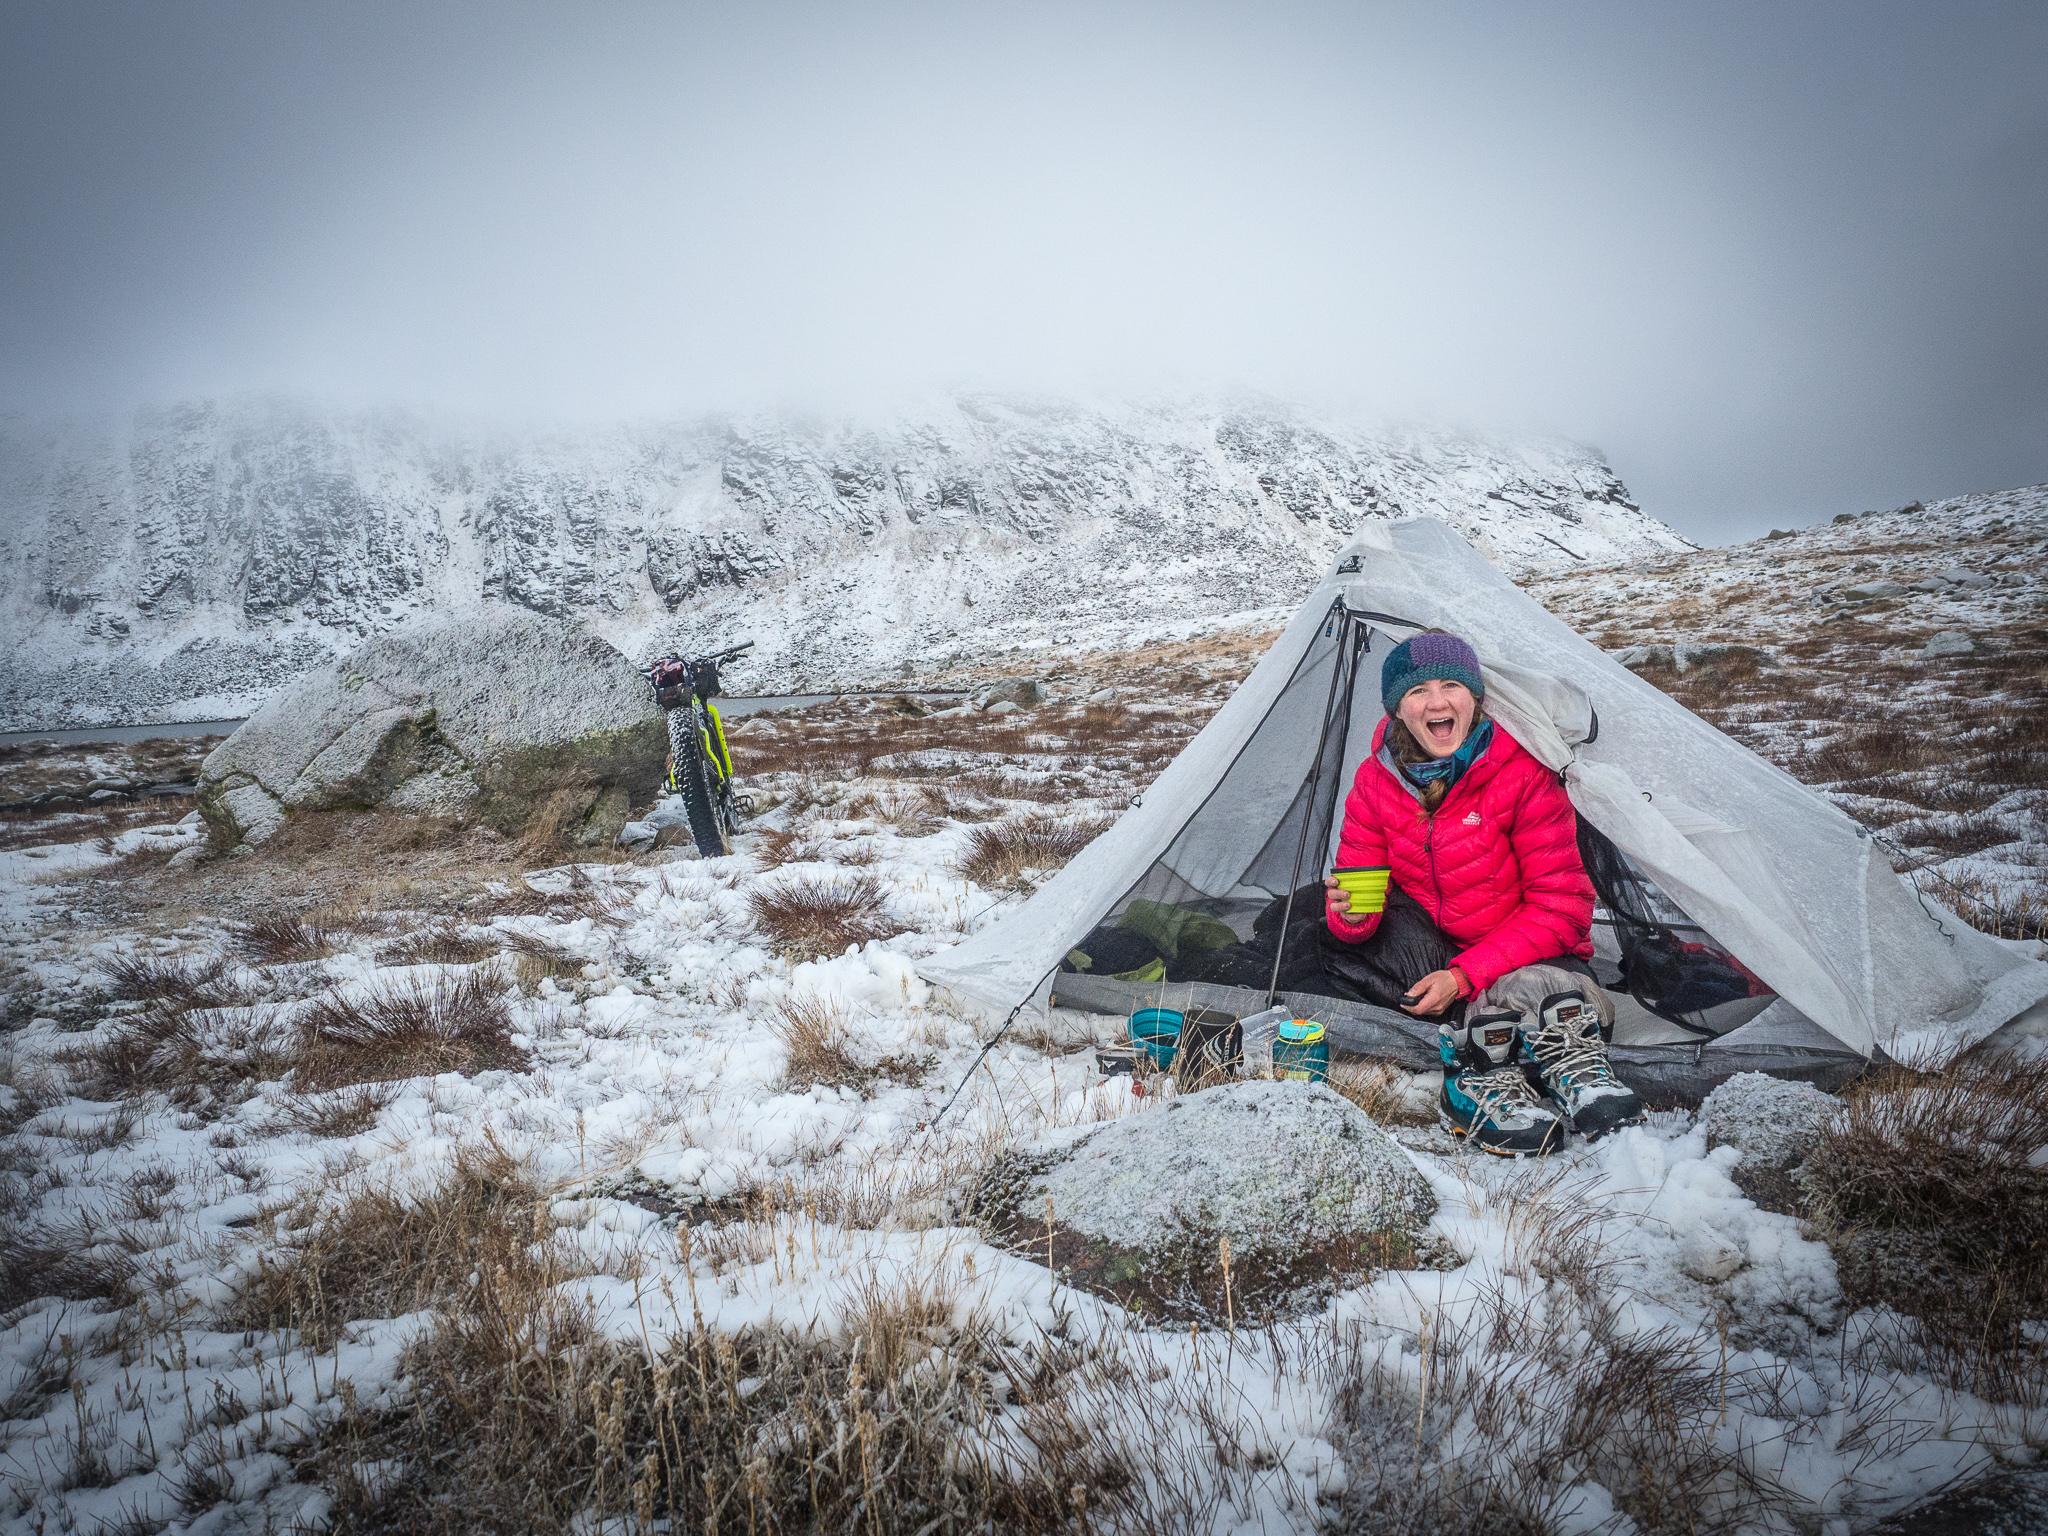 Camping in Scotland over winter. Photo: Annie Lloyd-Evans.